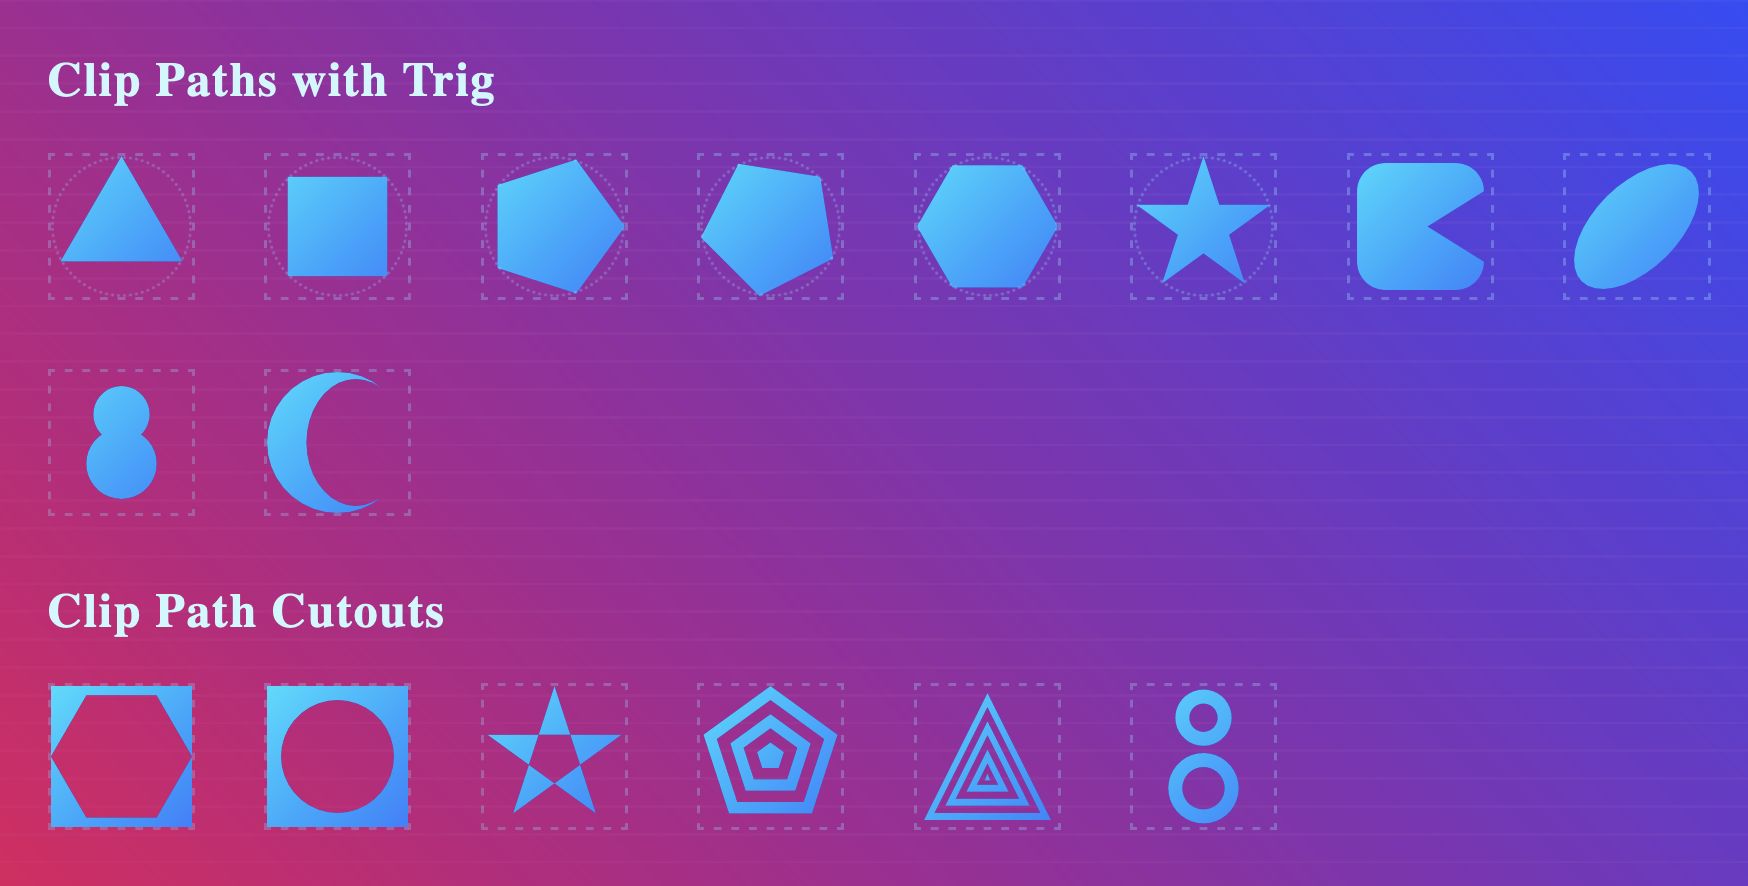 CSS-only shape examples like stars and ovals.